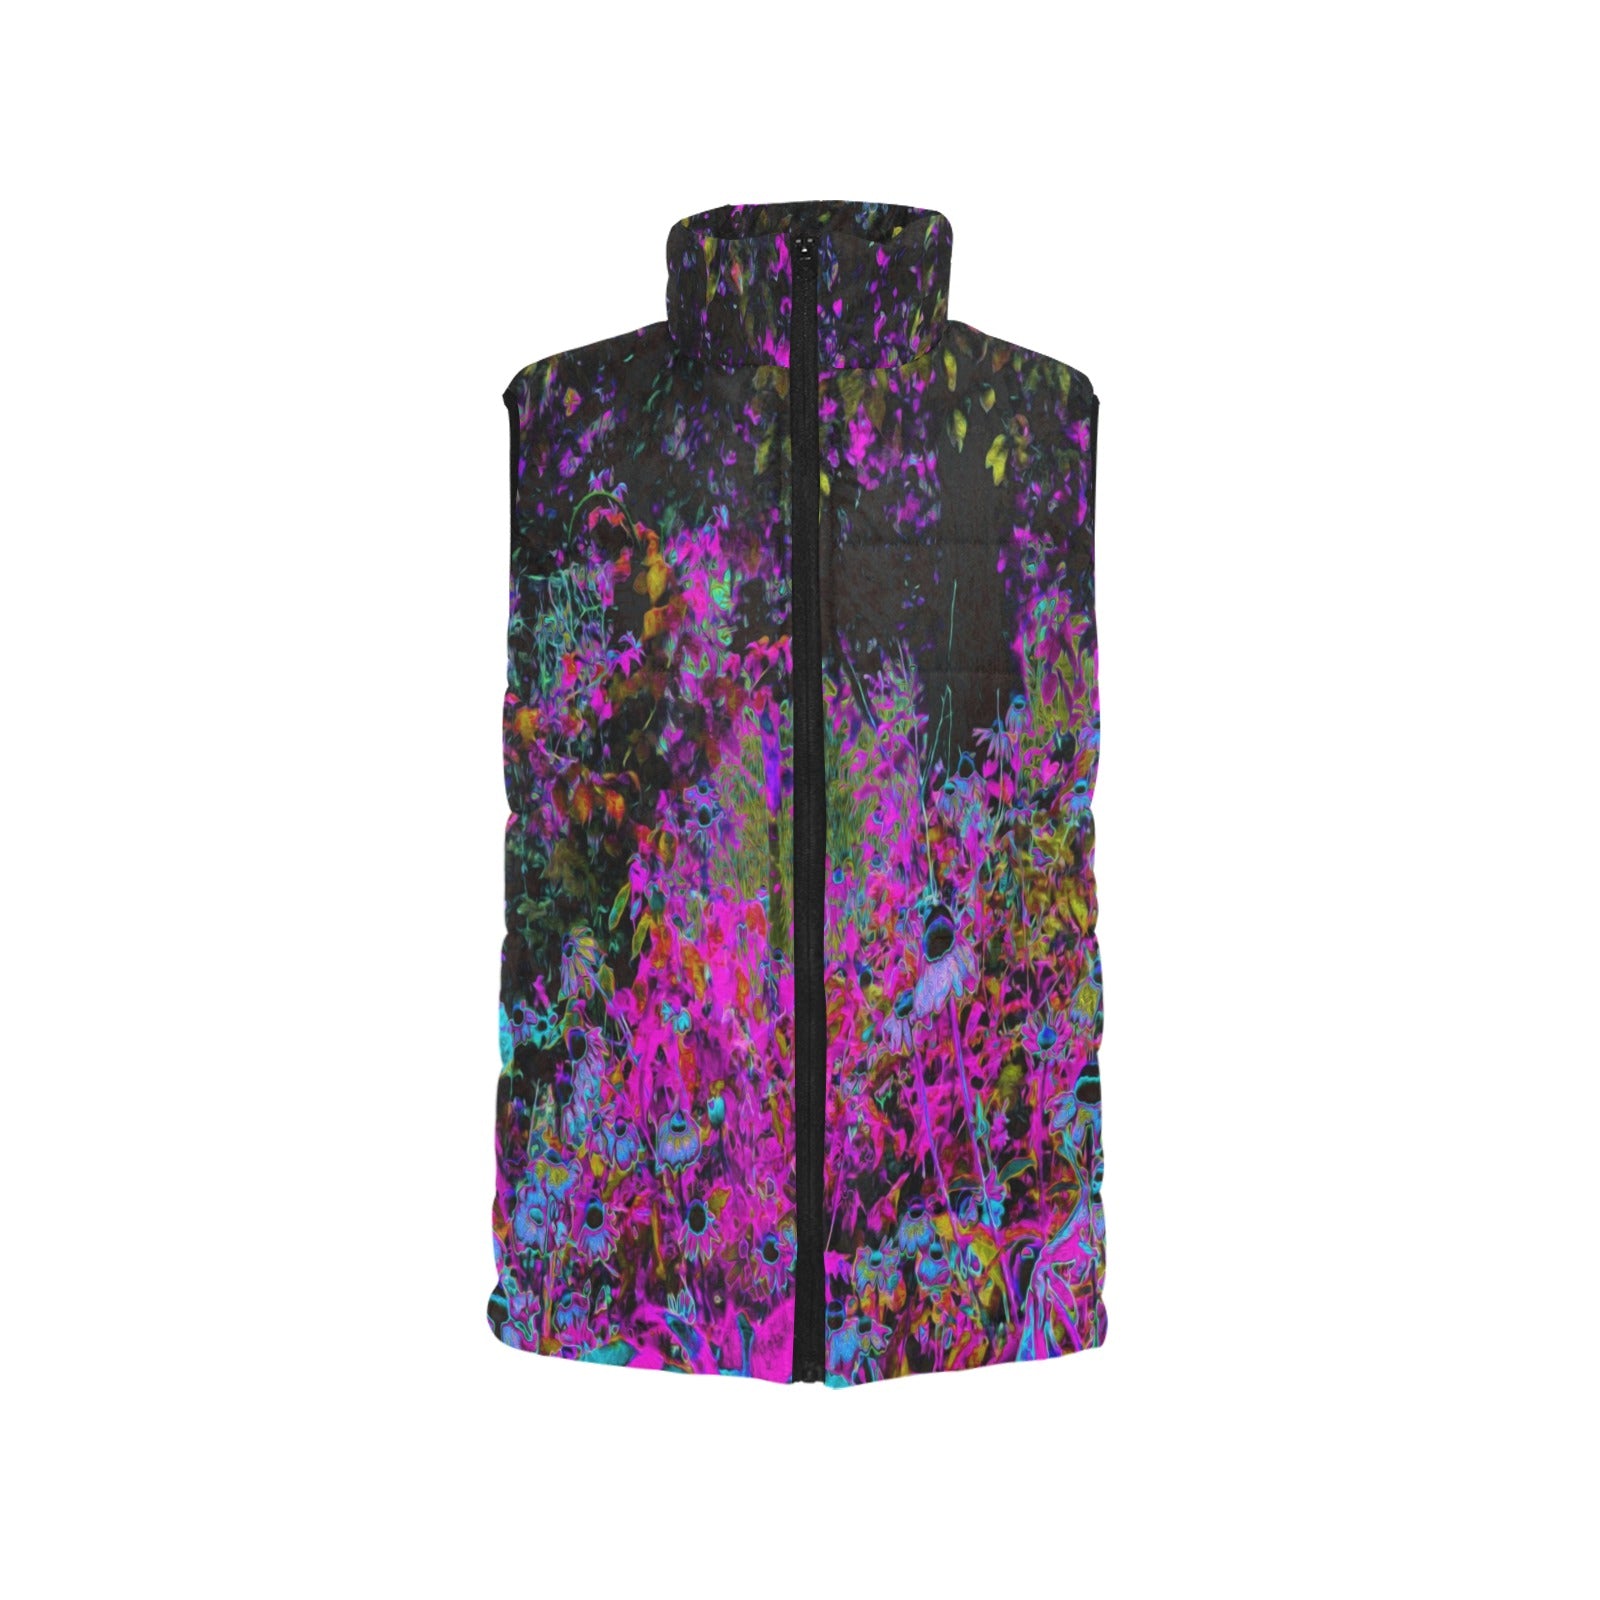 Women's Stand Collar Vest, Psychedelic Hot Pink and Black Garden Sunrise